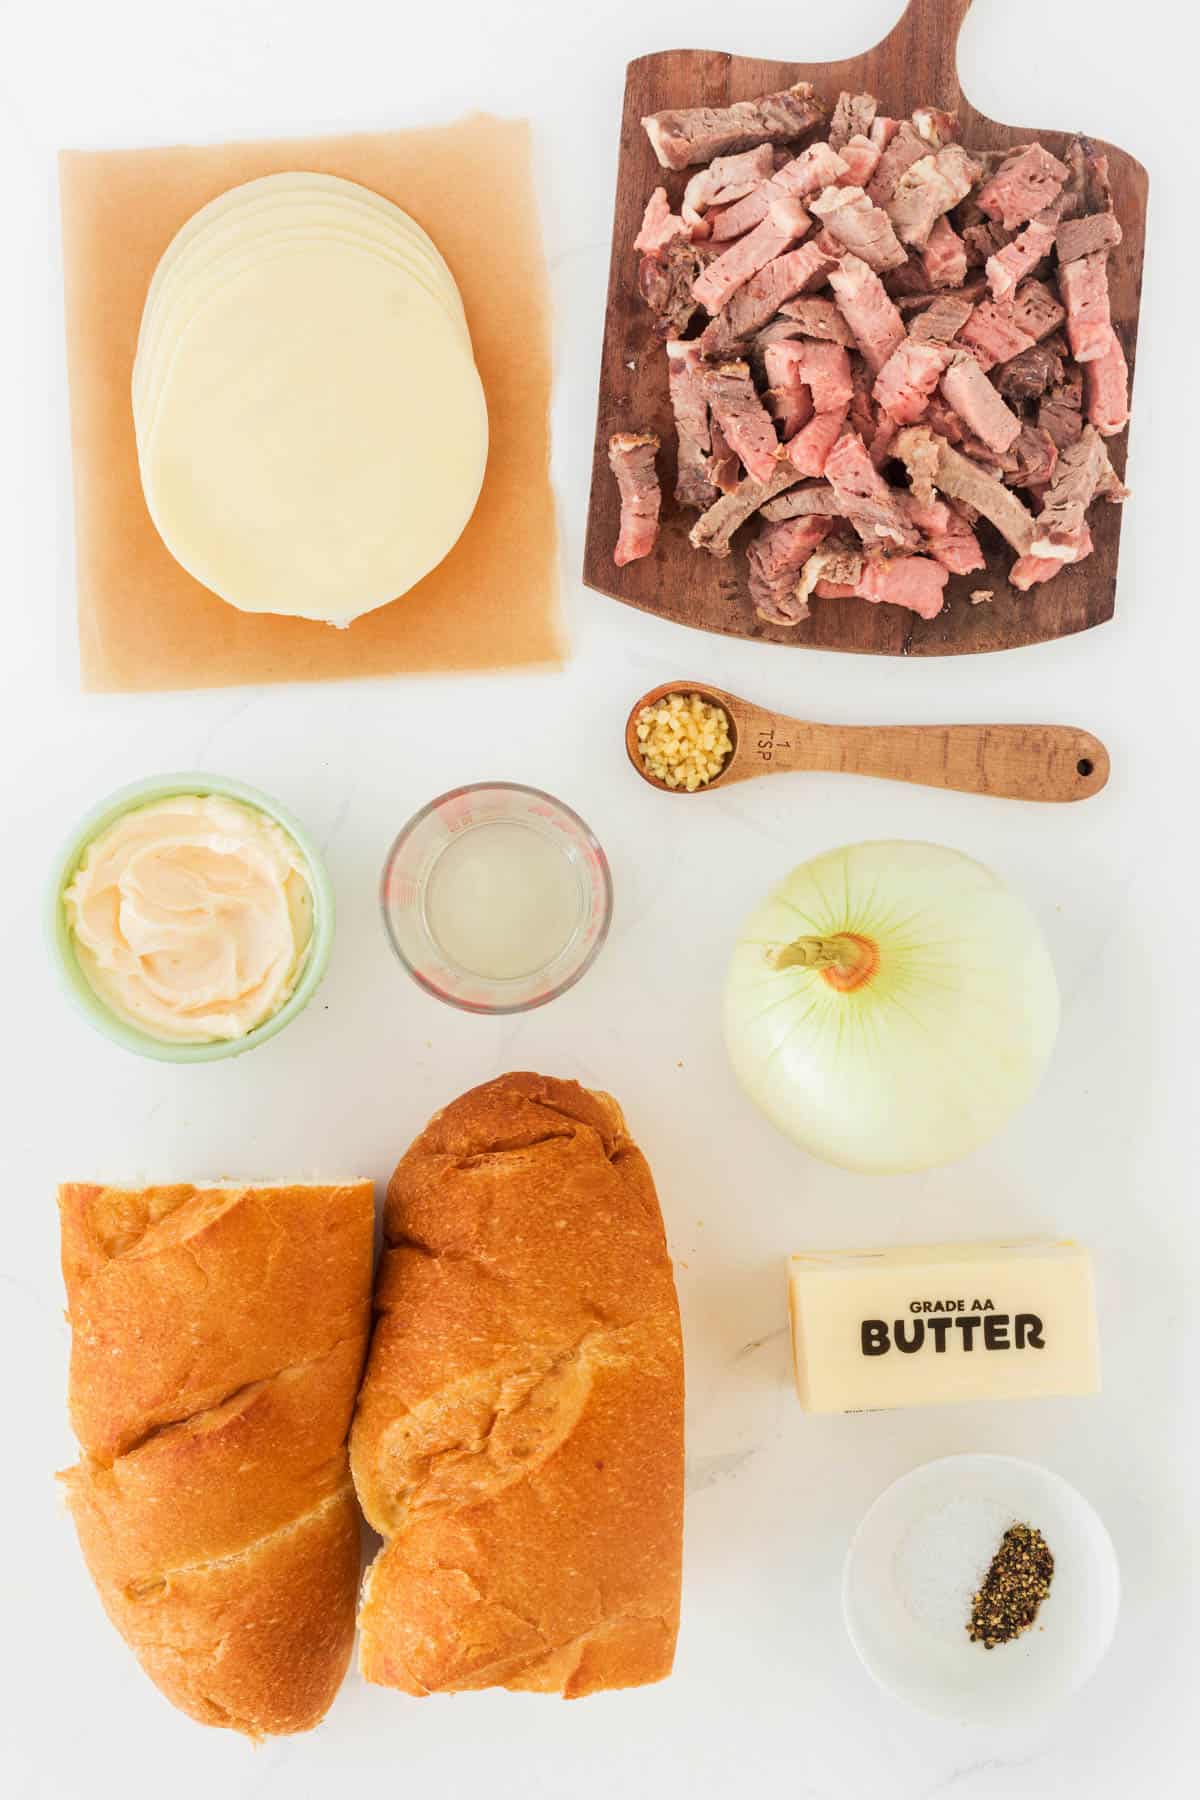 Ingredients for a best prime rib sandwich